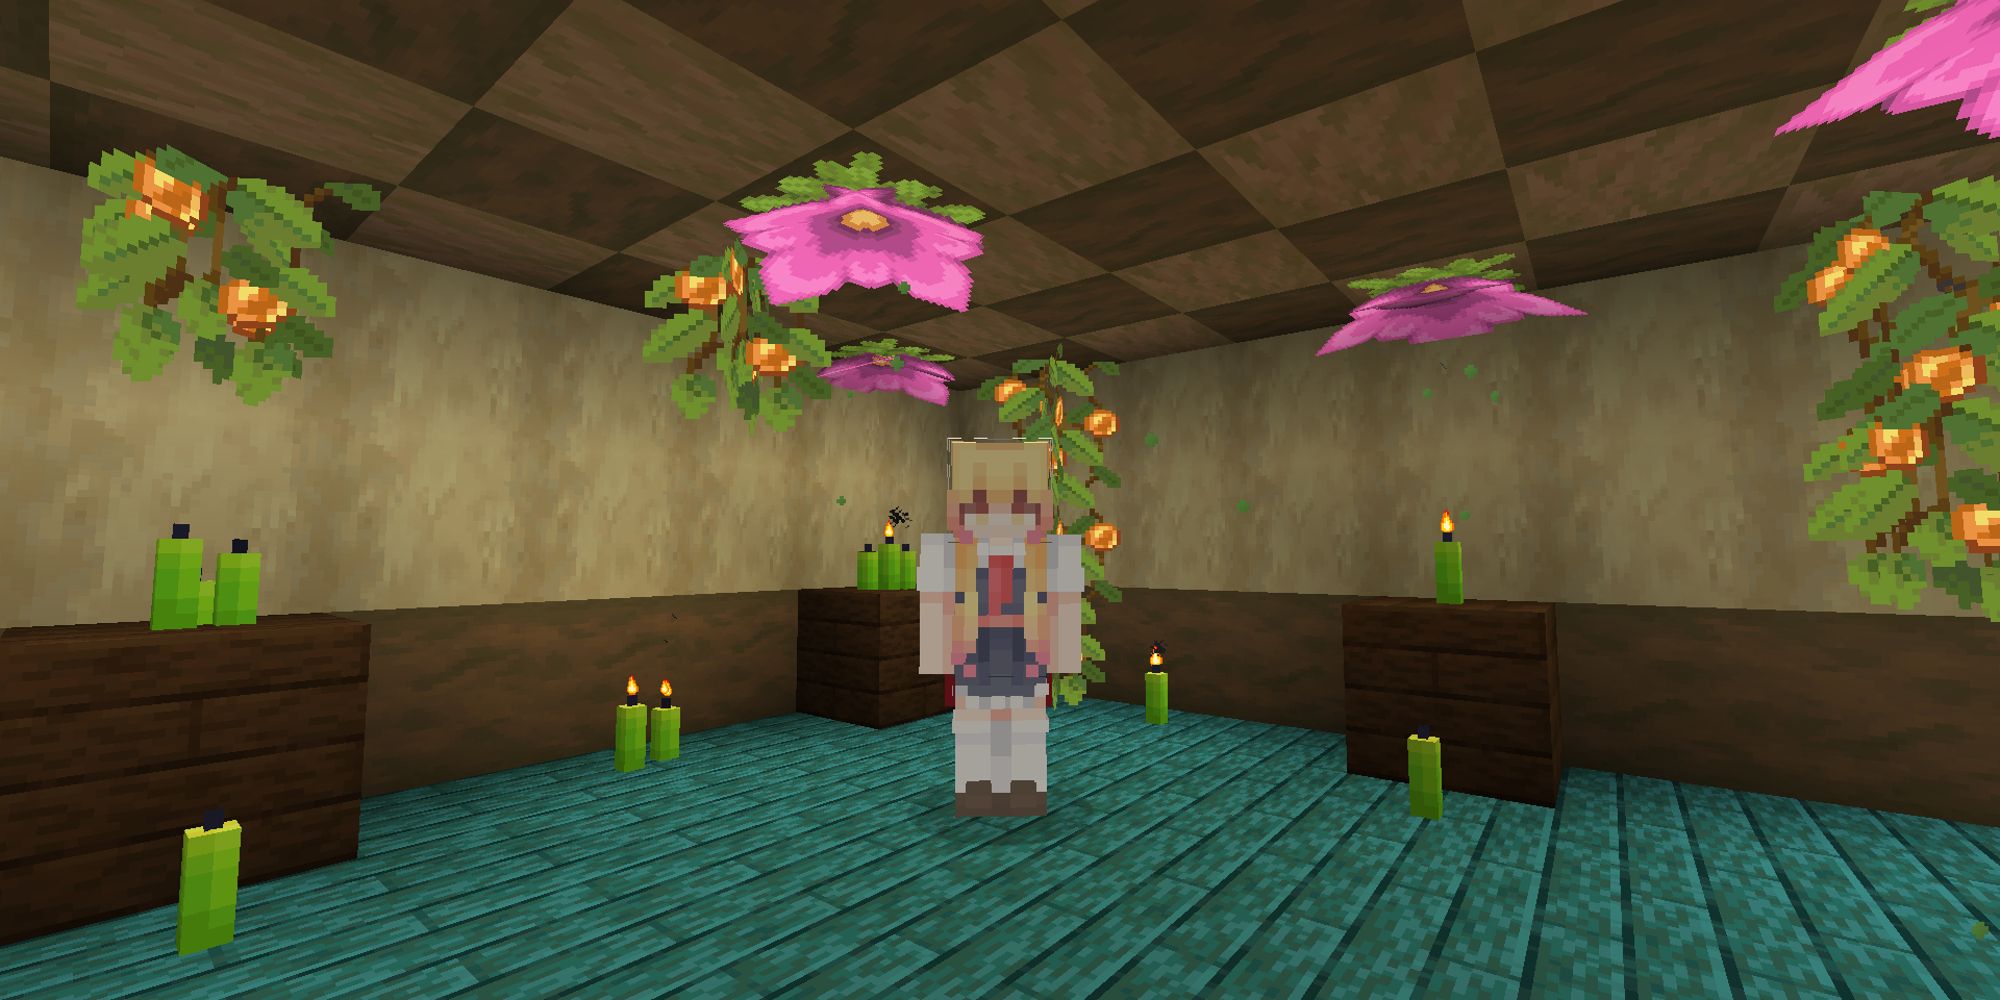 player standing in a room with spore blossoms and candles